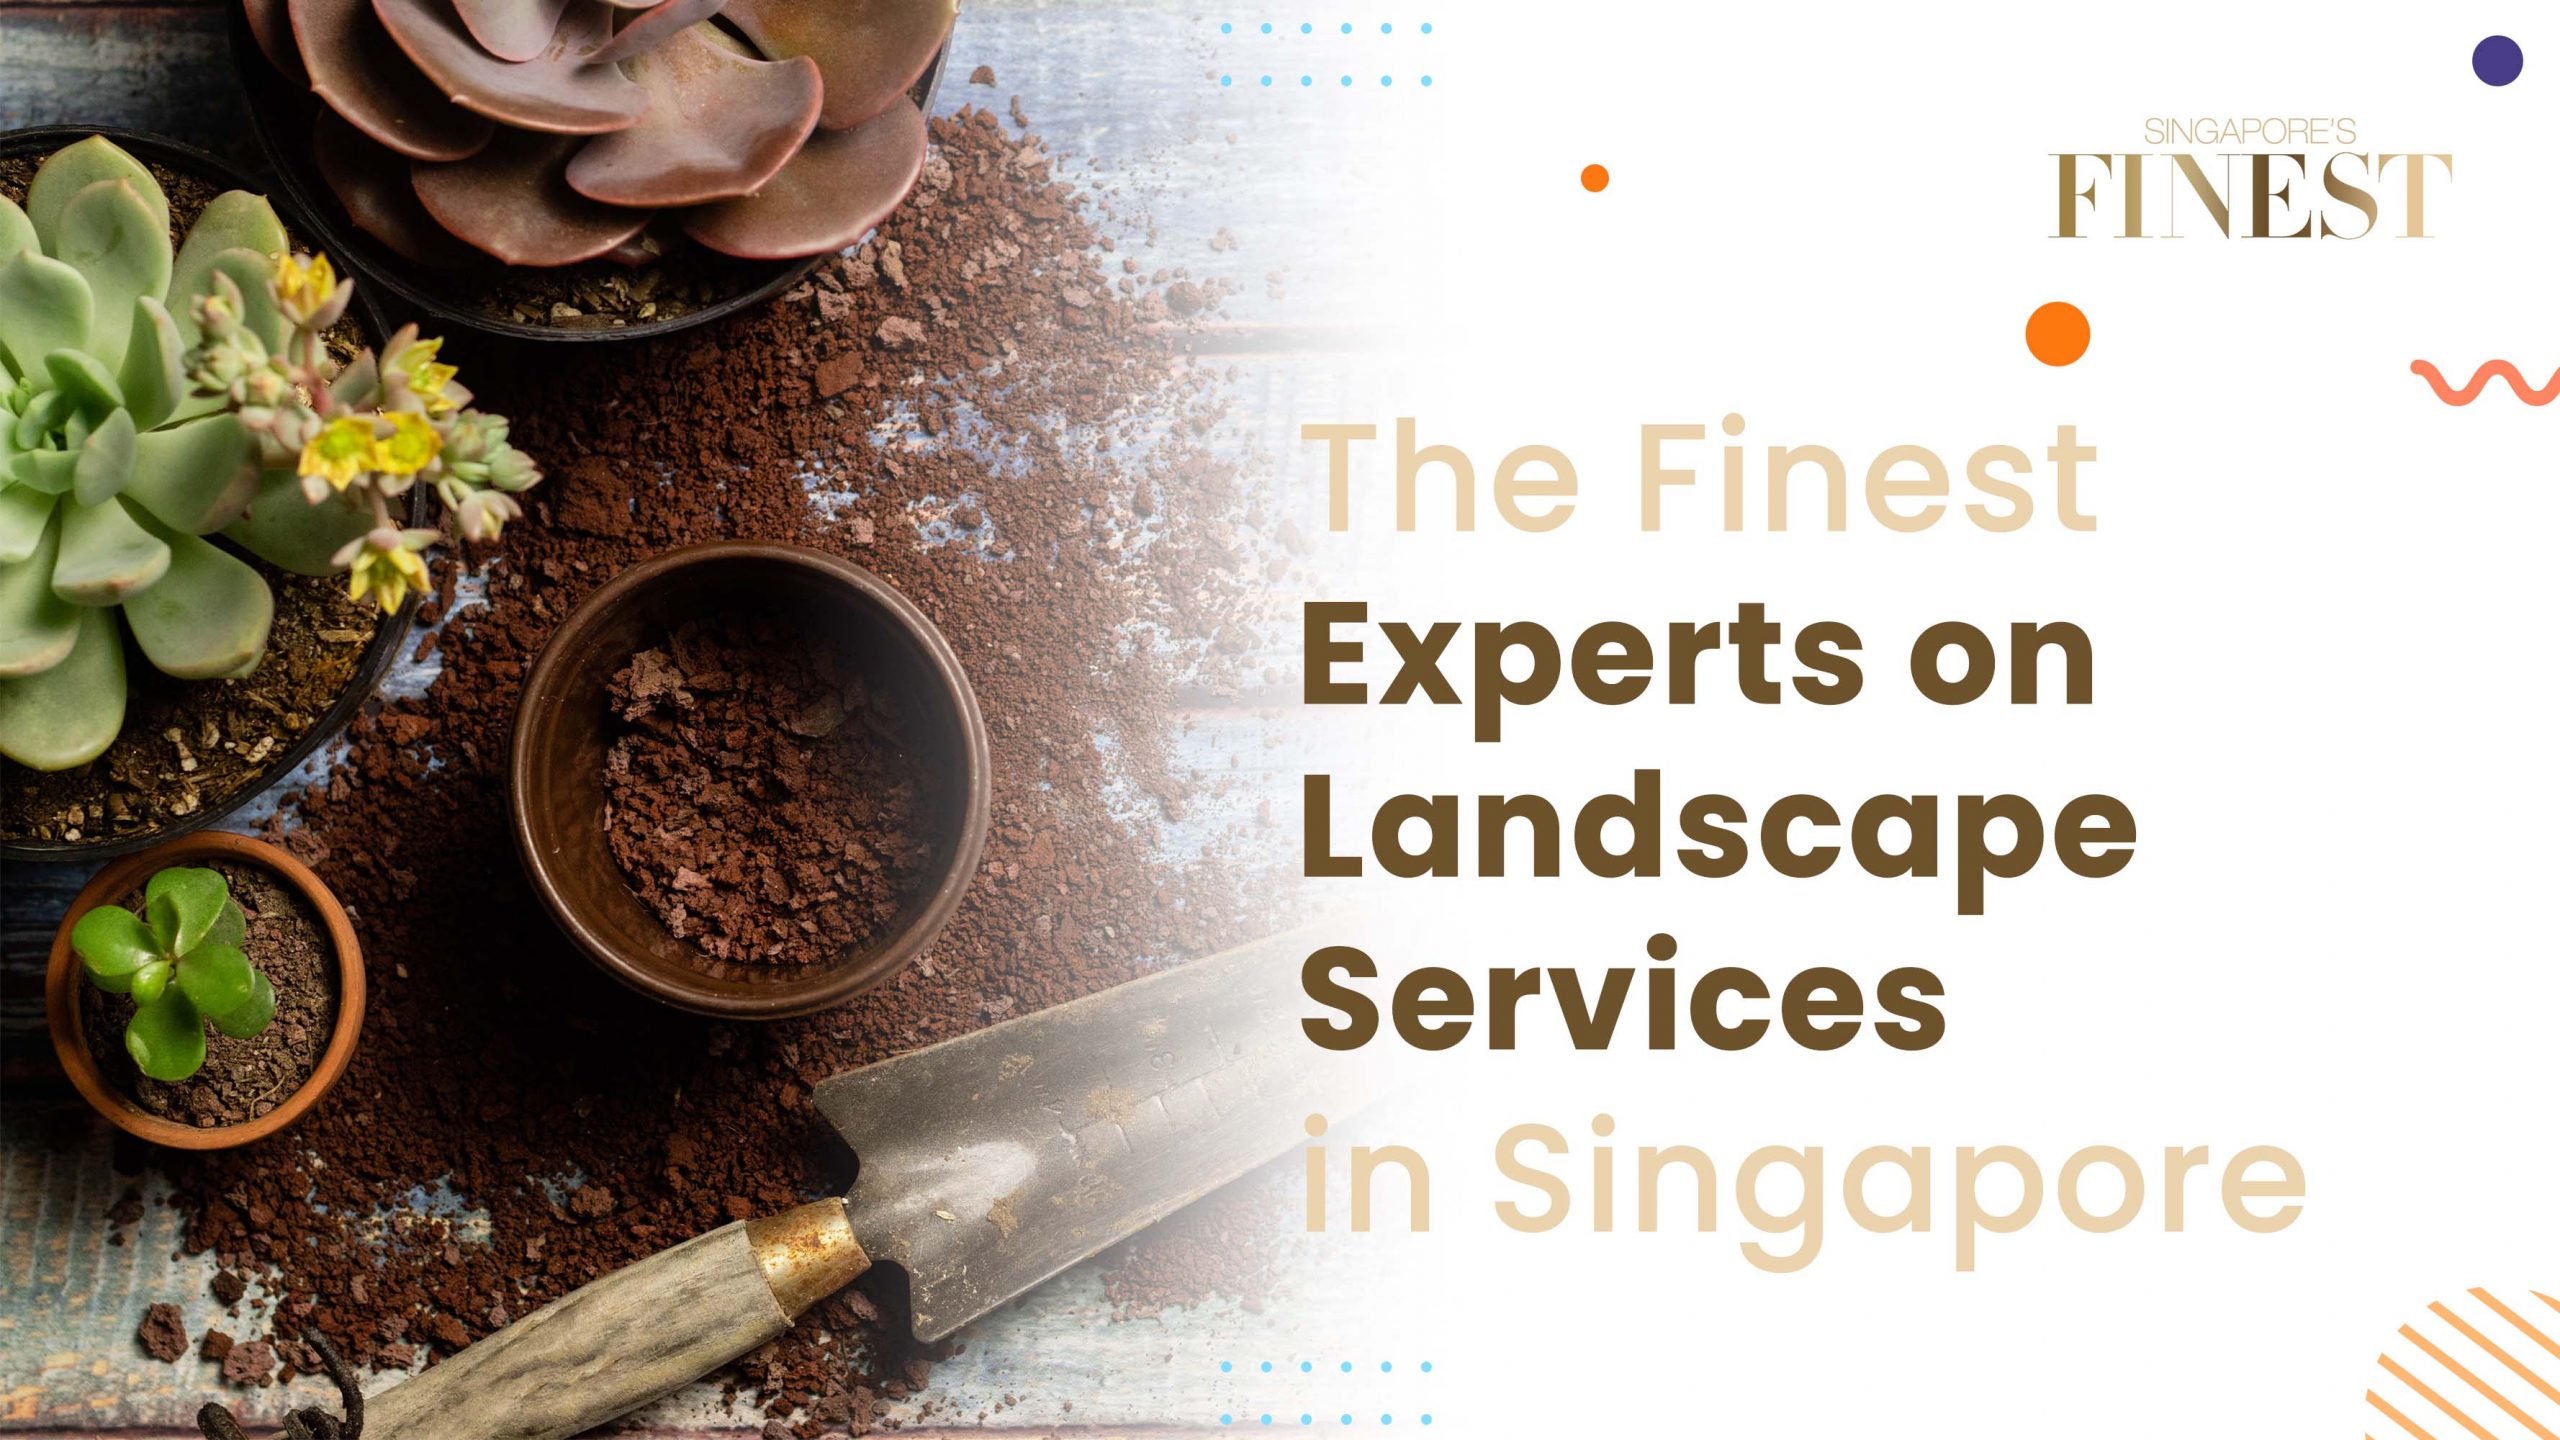 Finest Experts on Landscape Services in Singapore